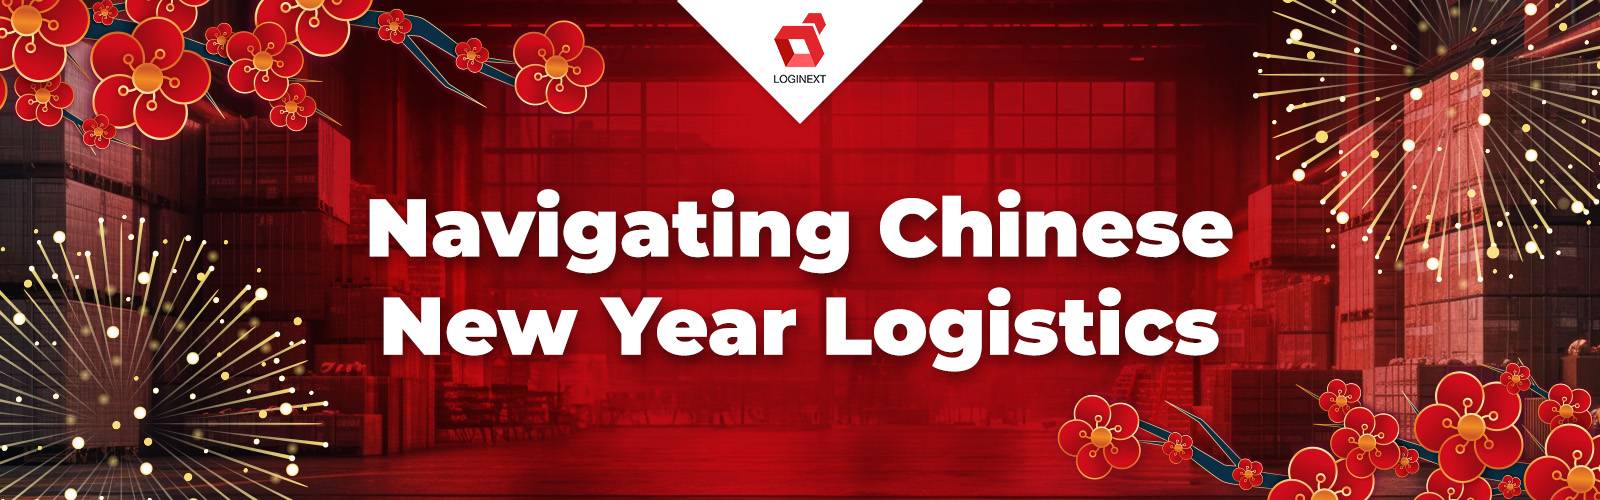 Navigating Chinese New Year Logistics With Logistics Management Software